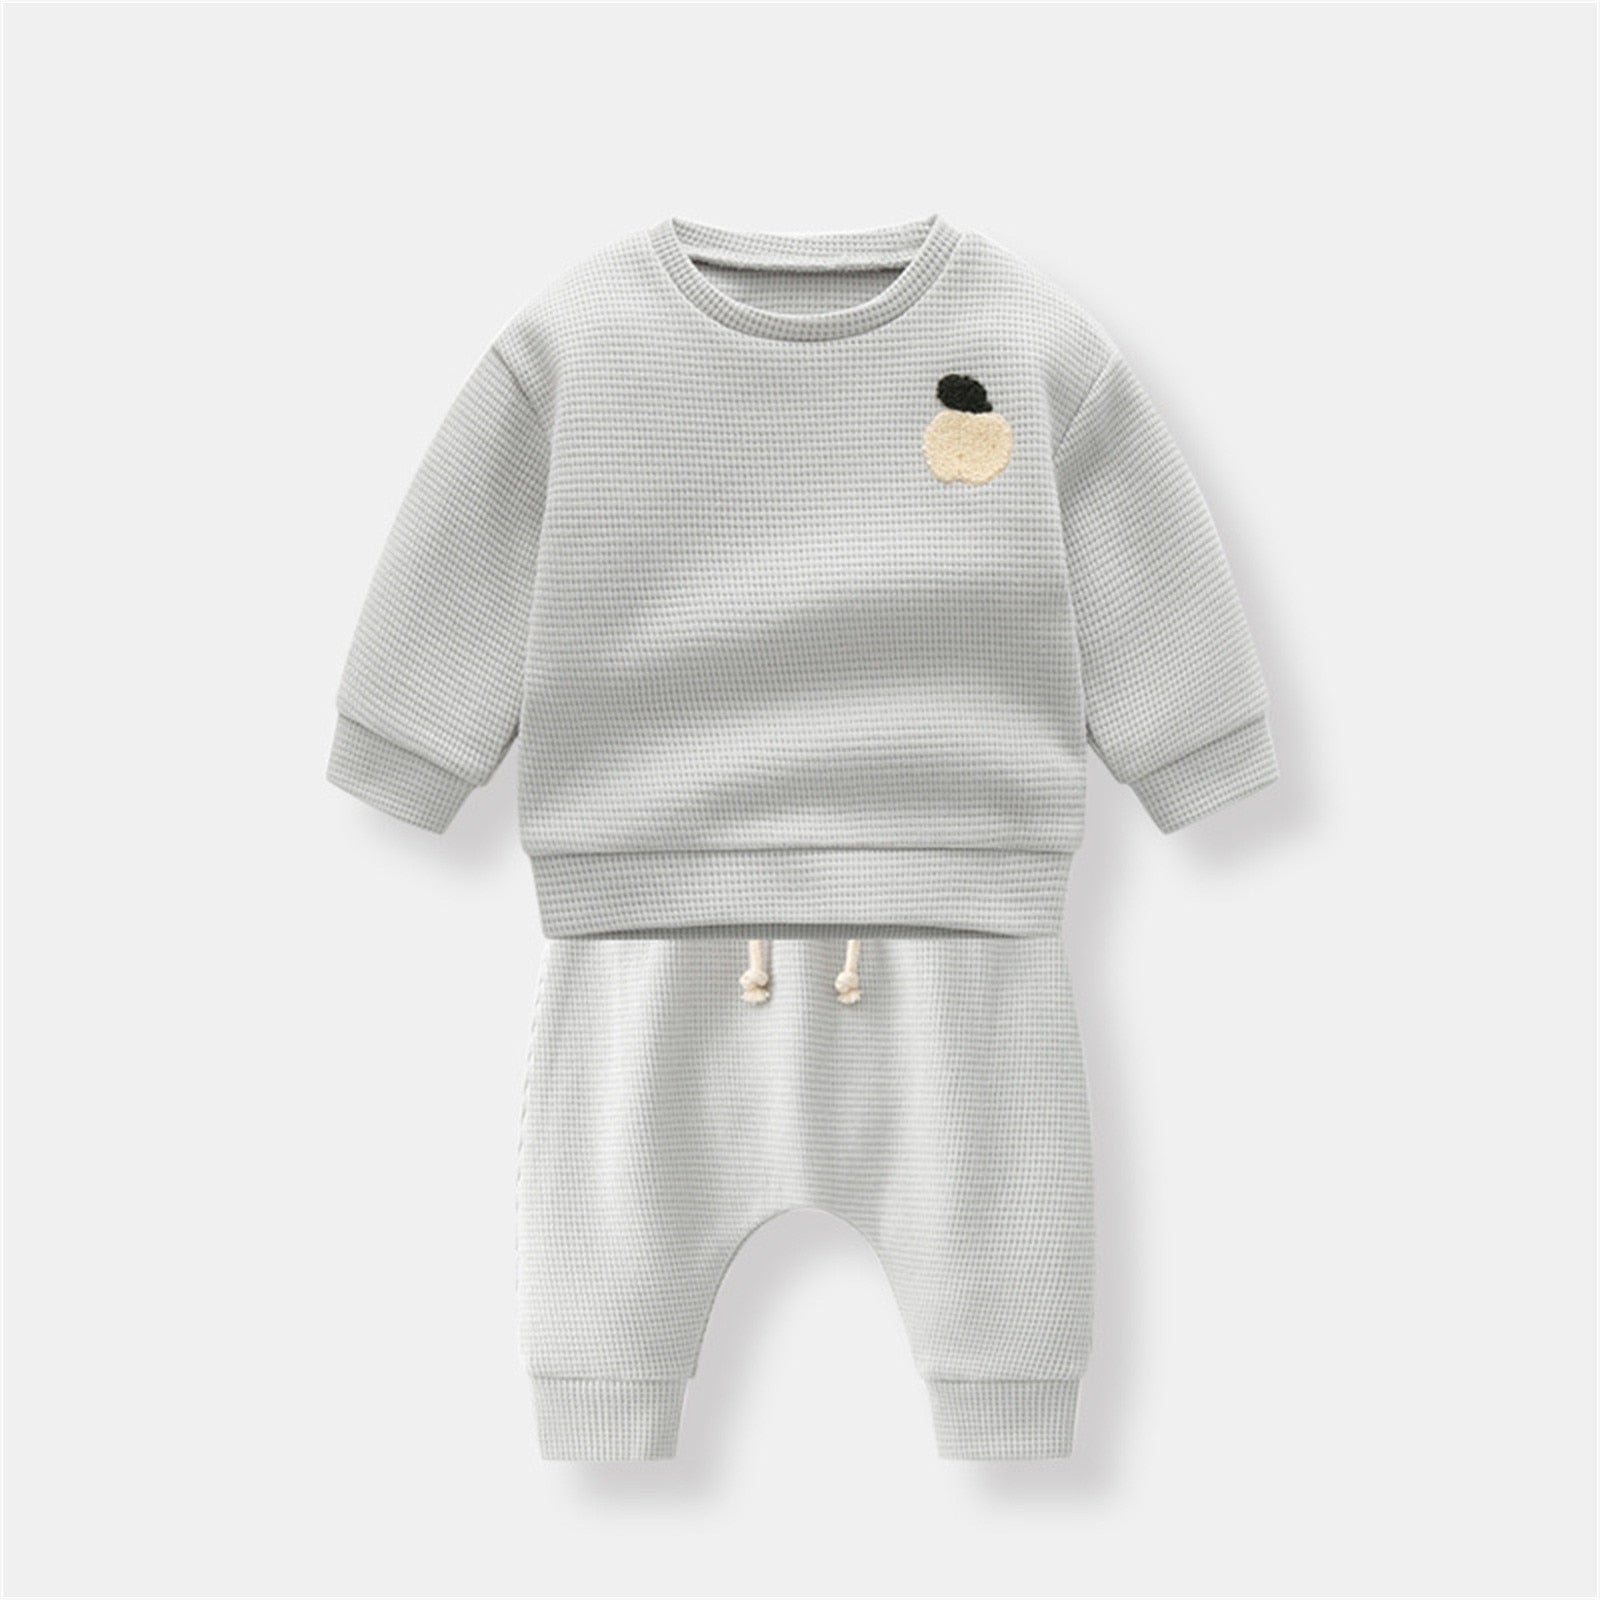 Infant Baby Girls Boys Autumn Winter Knit Letter Winter Track Pants 2pc outfit